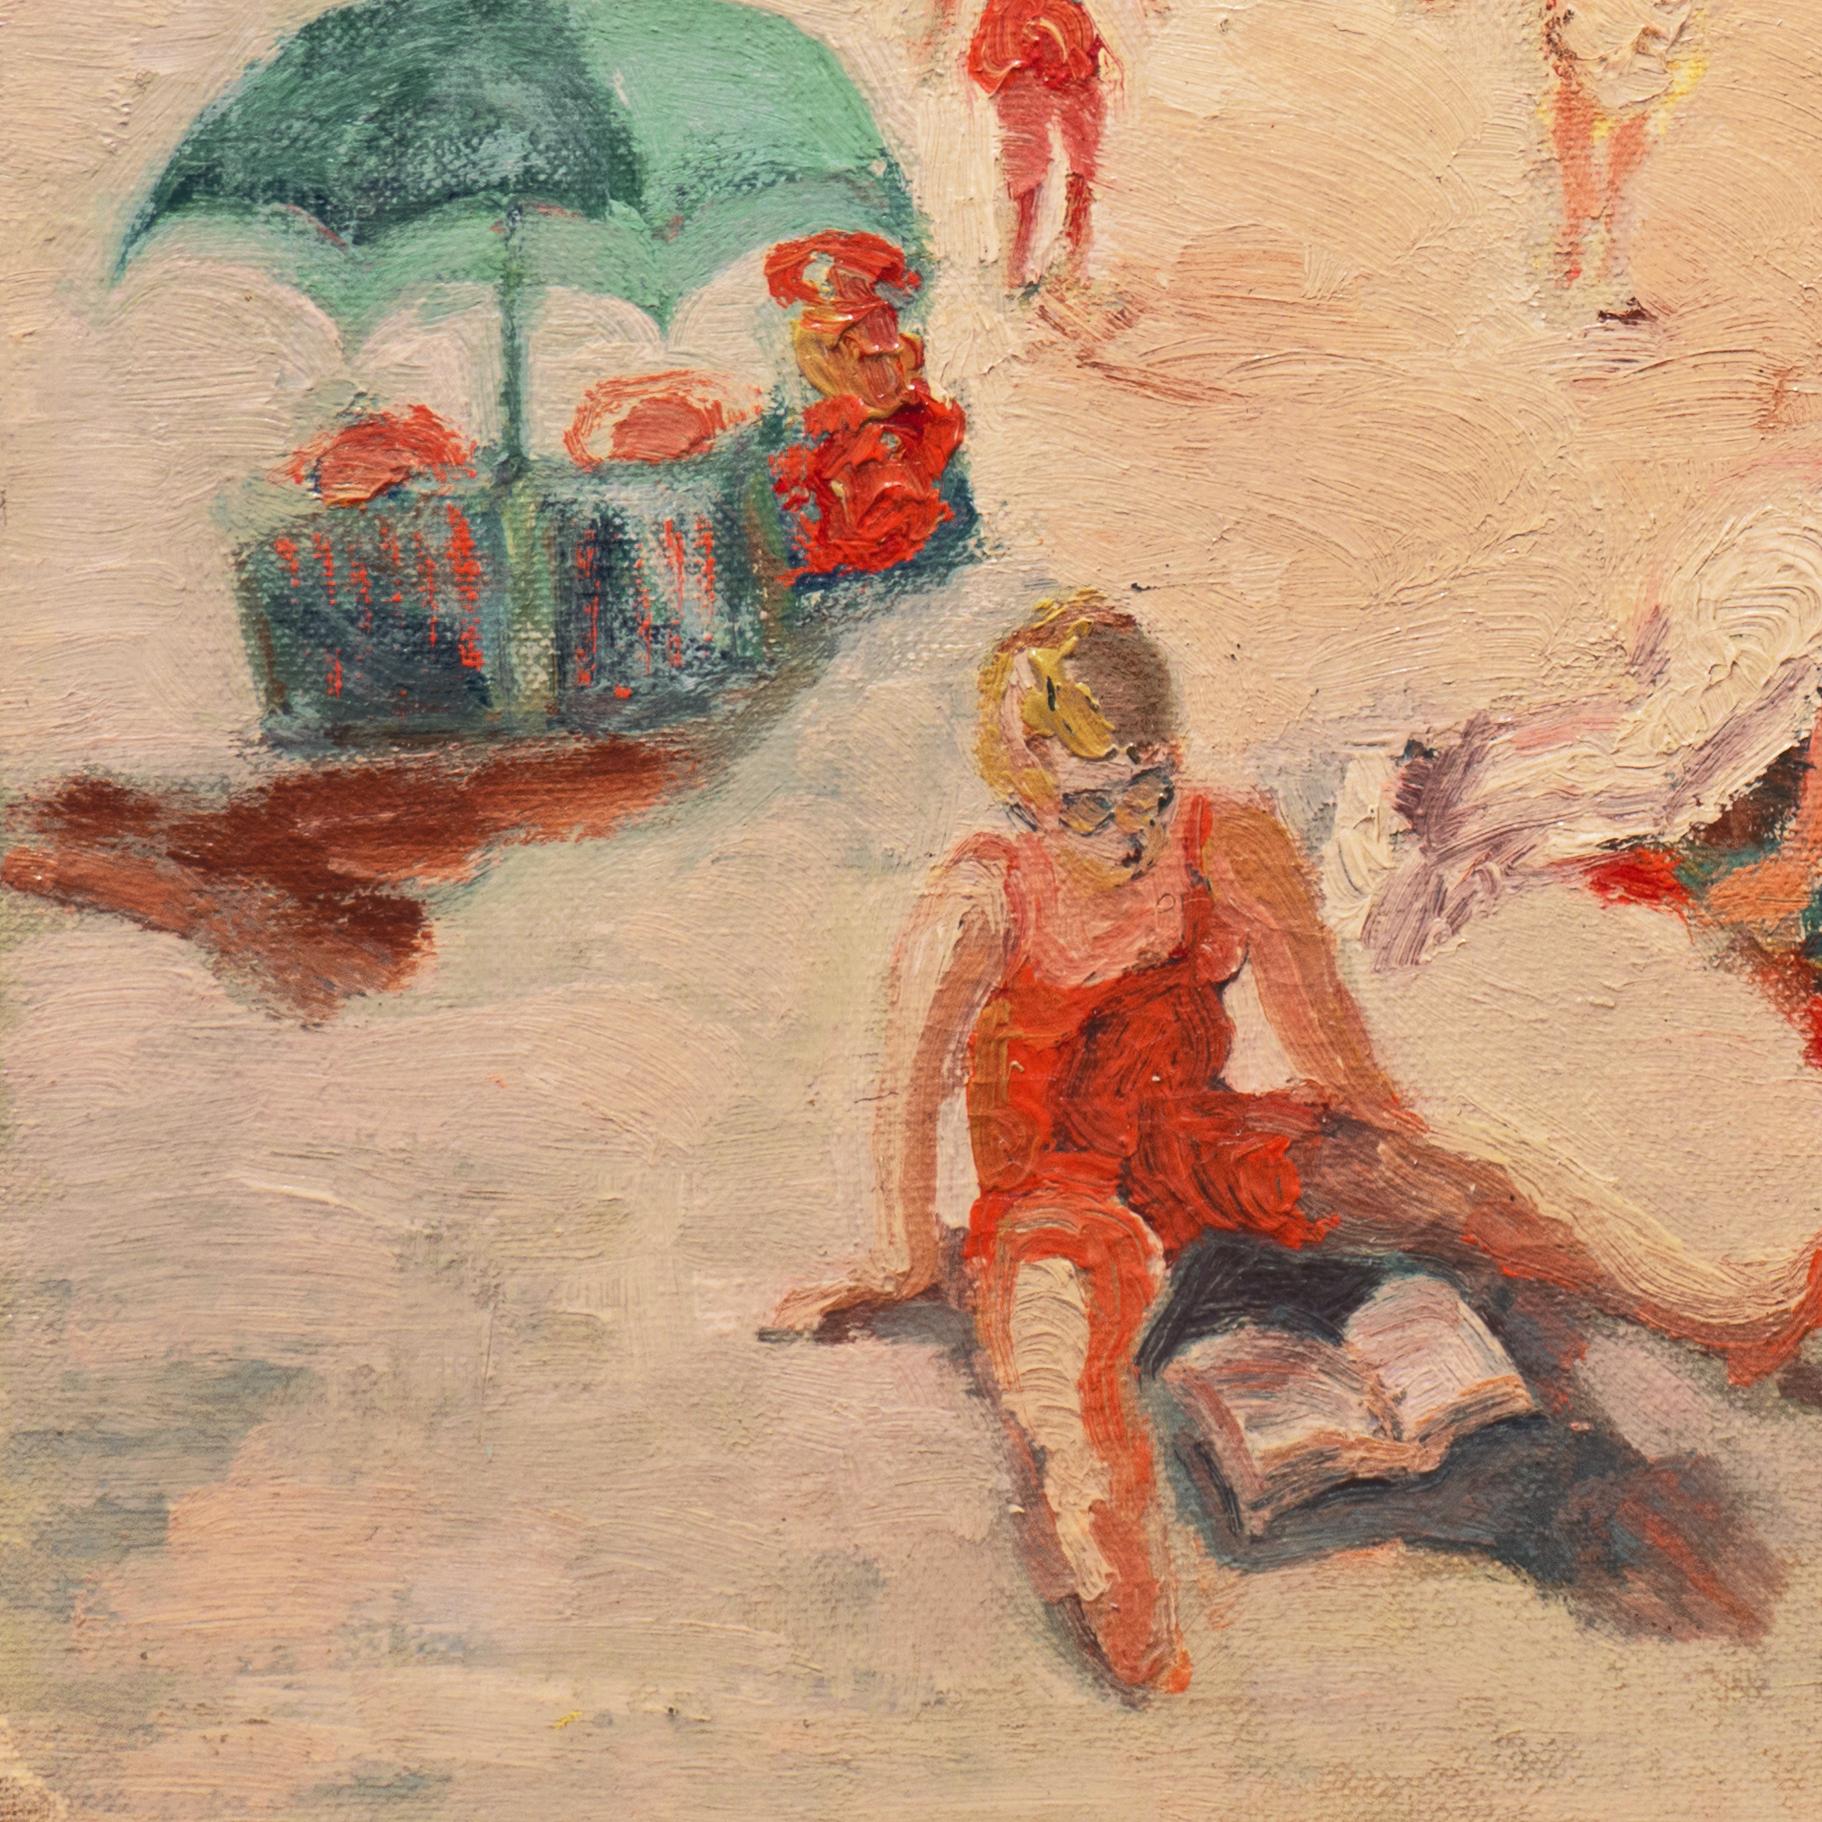 'At the Beach', California Impressionist woman artist, Carmel, Cooper Union - Painting by Marjory Pegram